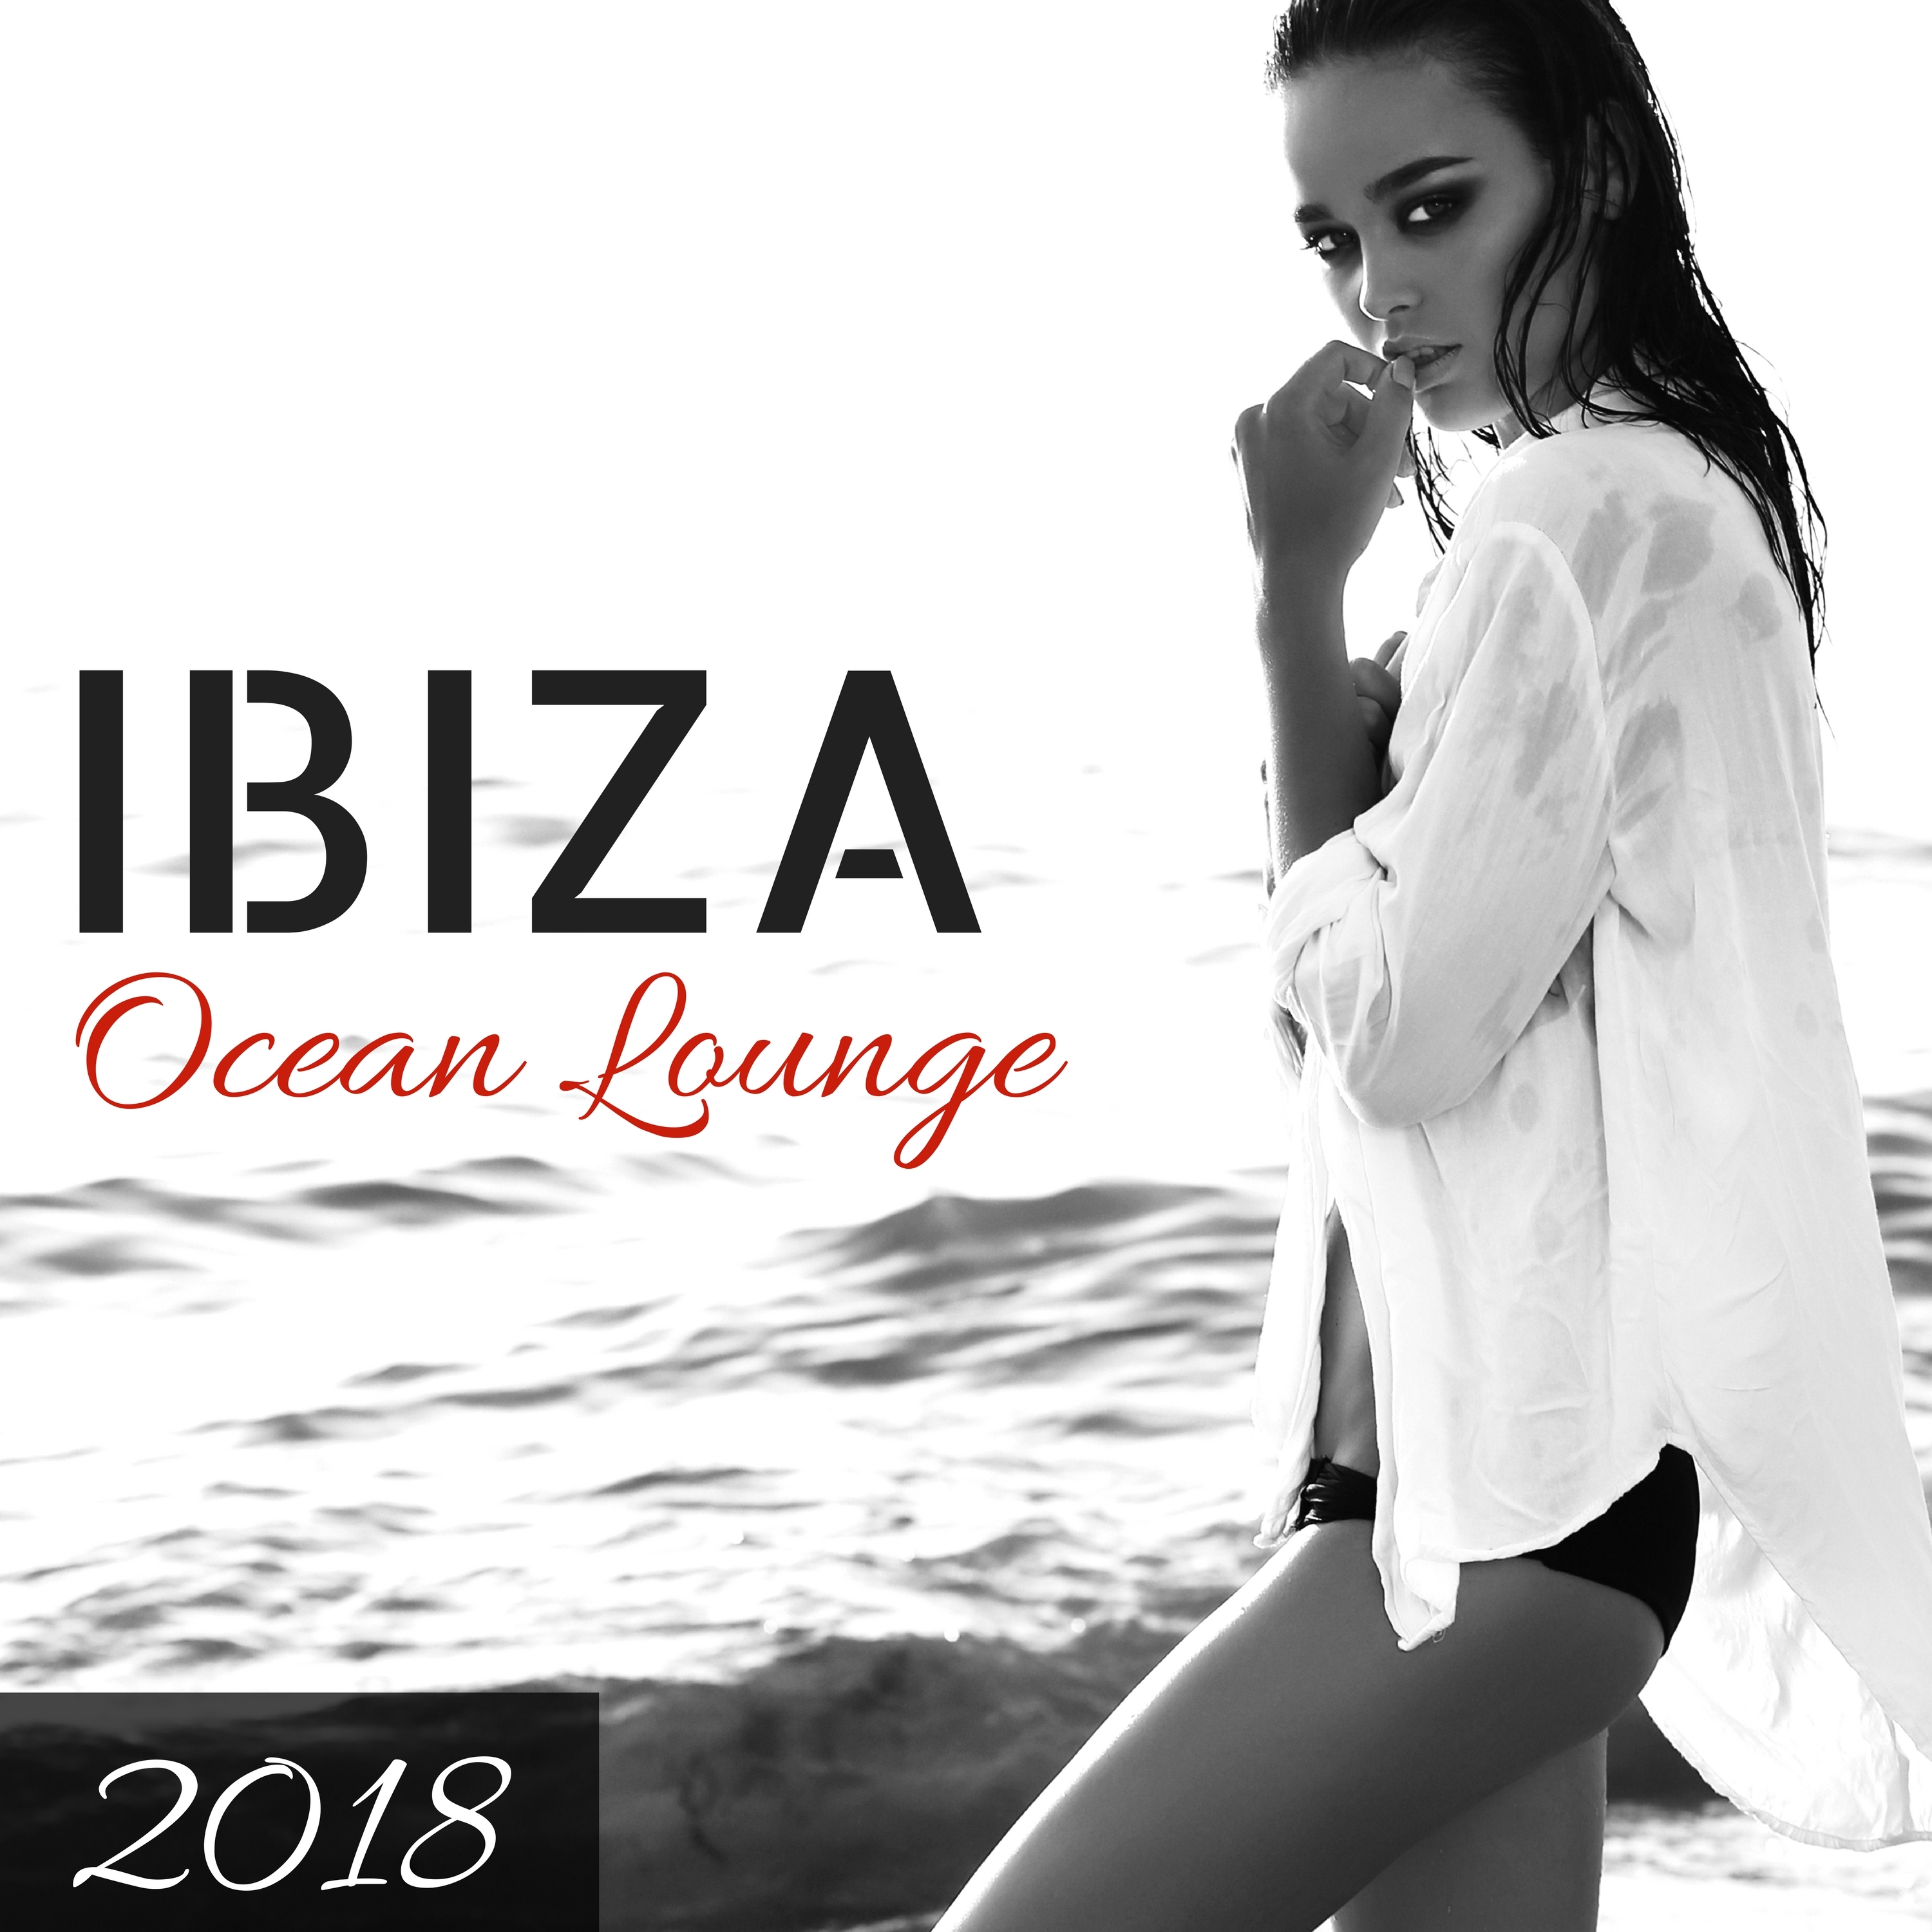 Ibiza Ocean Lounge 2018 - Instrumental Lounge Mix CD for Summer Nights and Ibiza Party